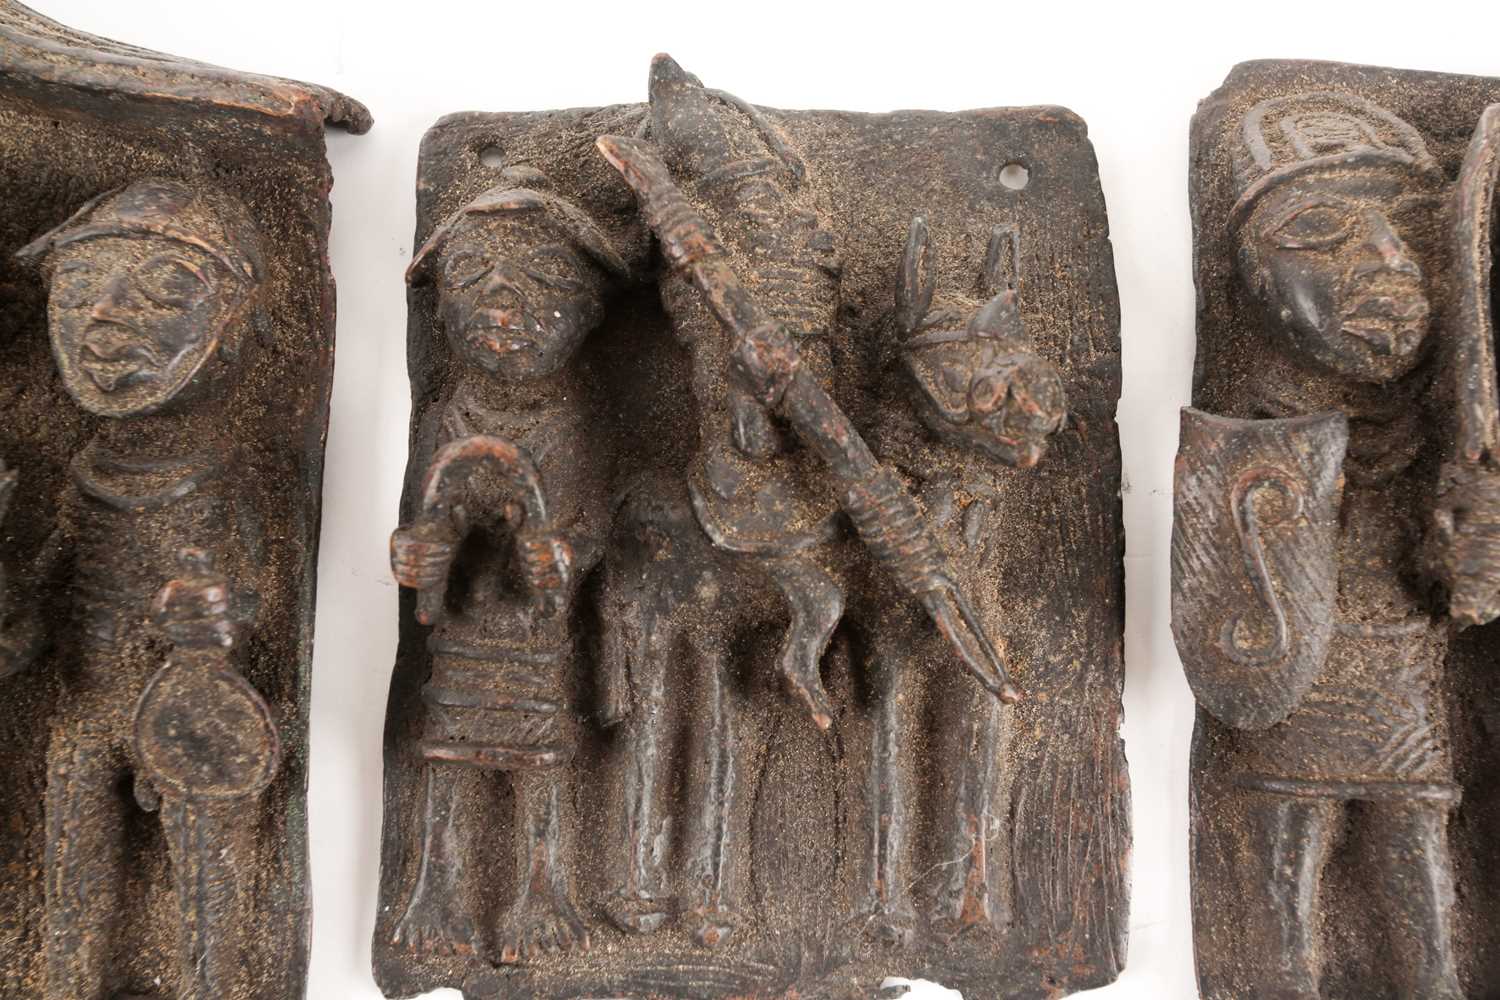 Three Benin bronze plaques, Nigeria, comprising an equestrian warrior and attendant, a group of - Image 5 of 5